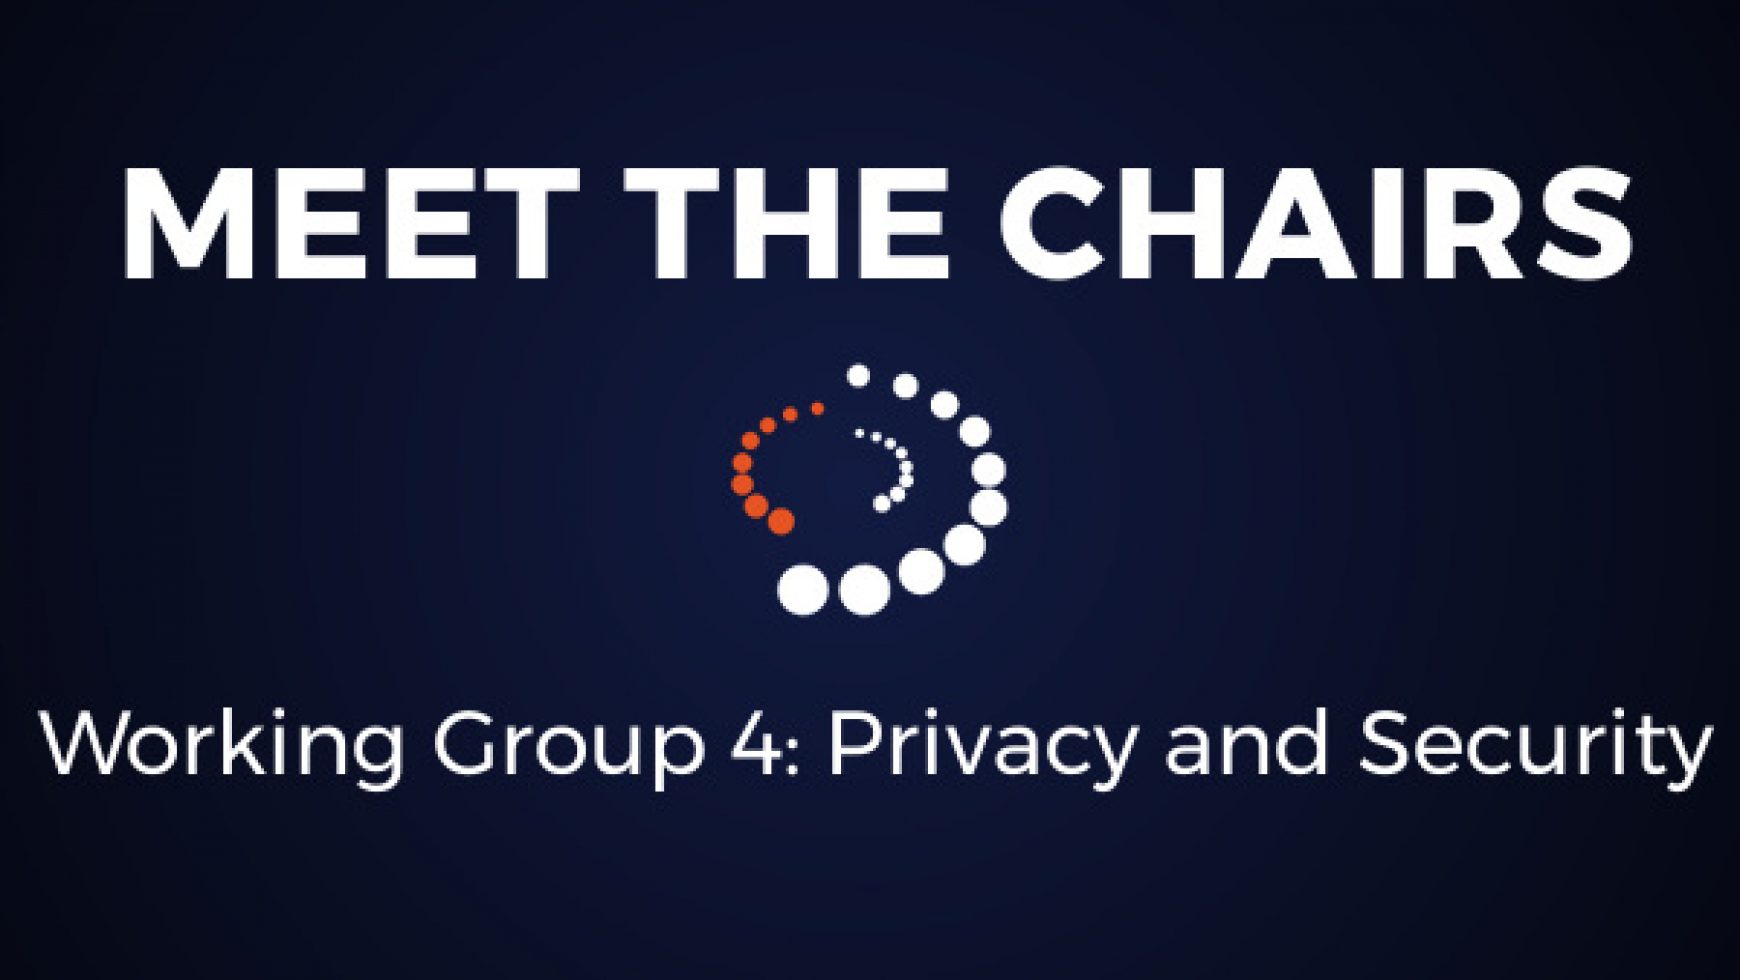 Meet the Chairs: Working Group 4 Privacy and Security